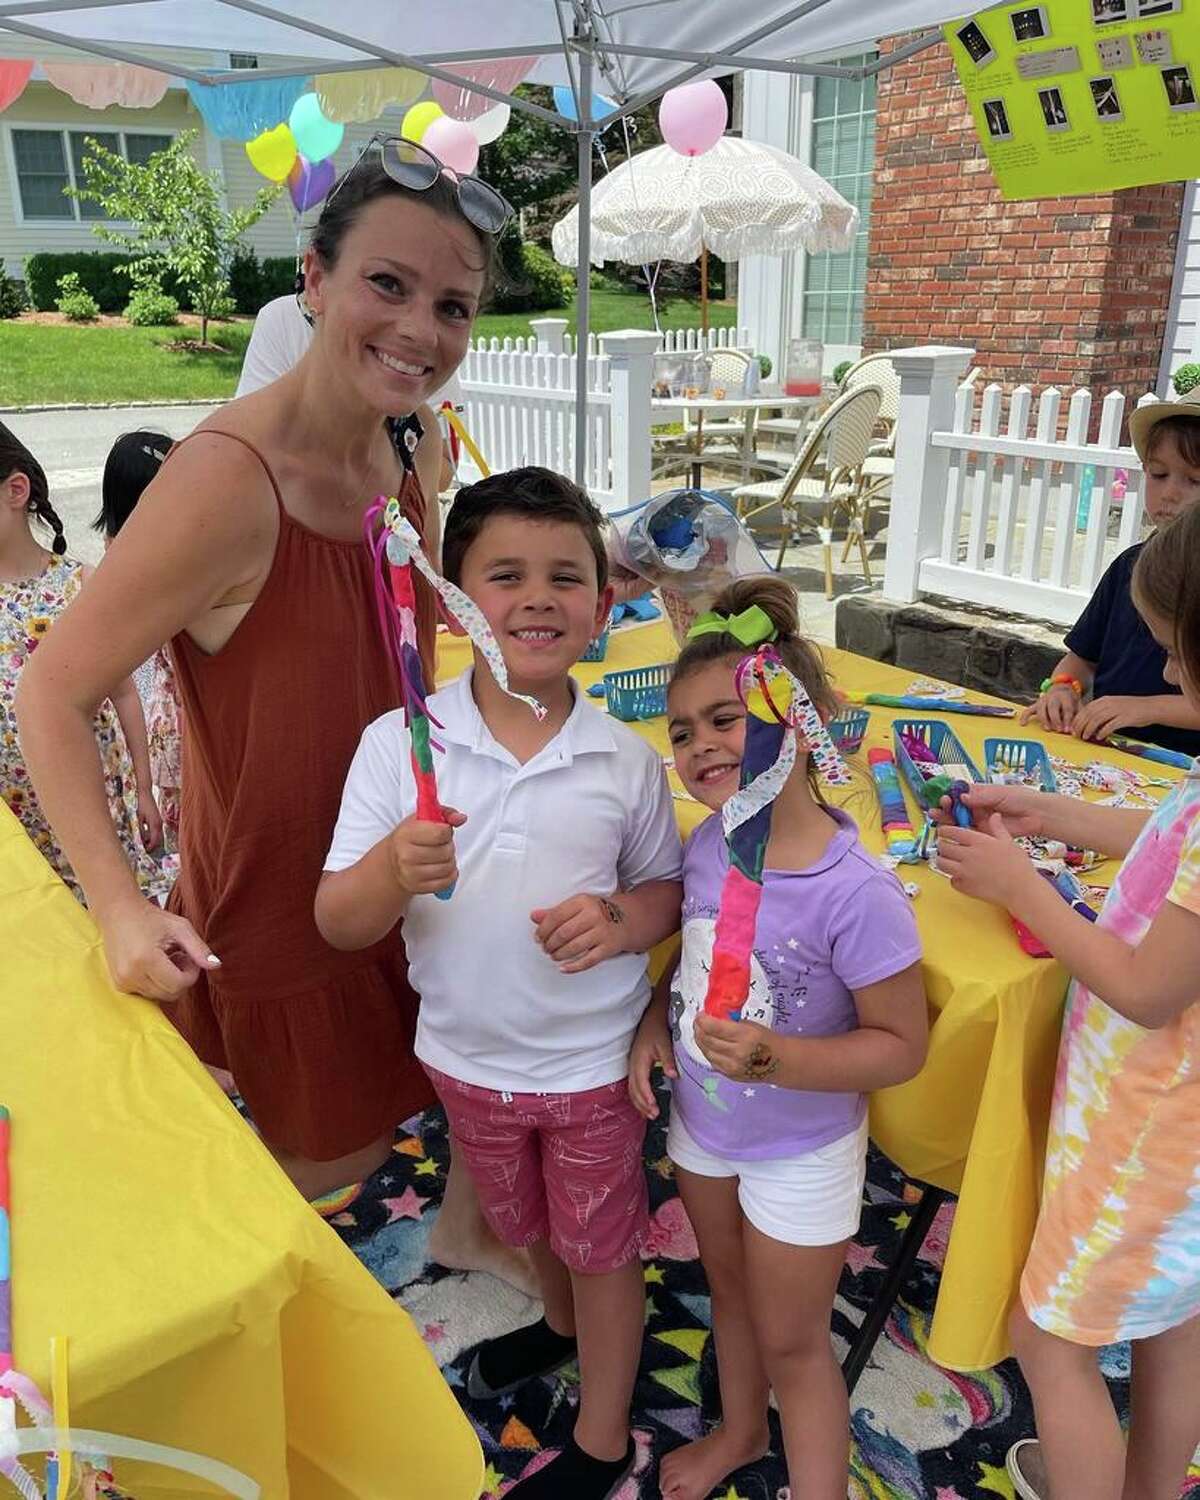 As owner and coordinator of Silly Goose, Ridgefield resident Kate Haase-MacDonald (left) works to coordinate parties for local families that incorporate their children's favorite things into fun activities.